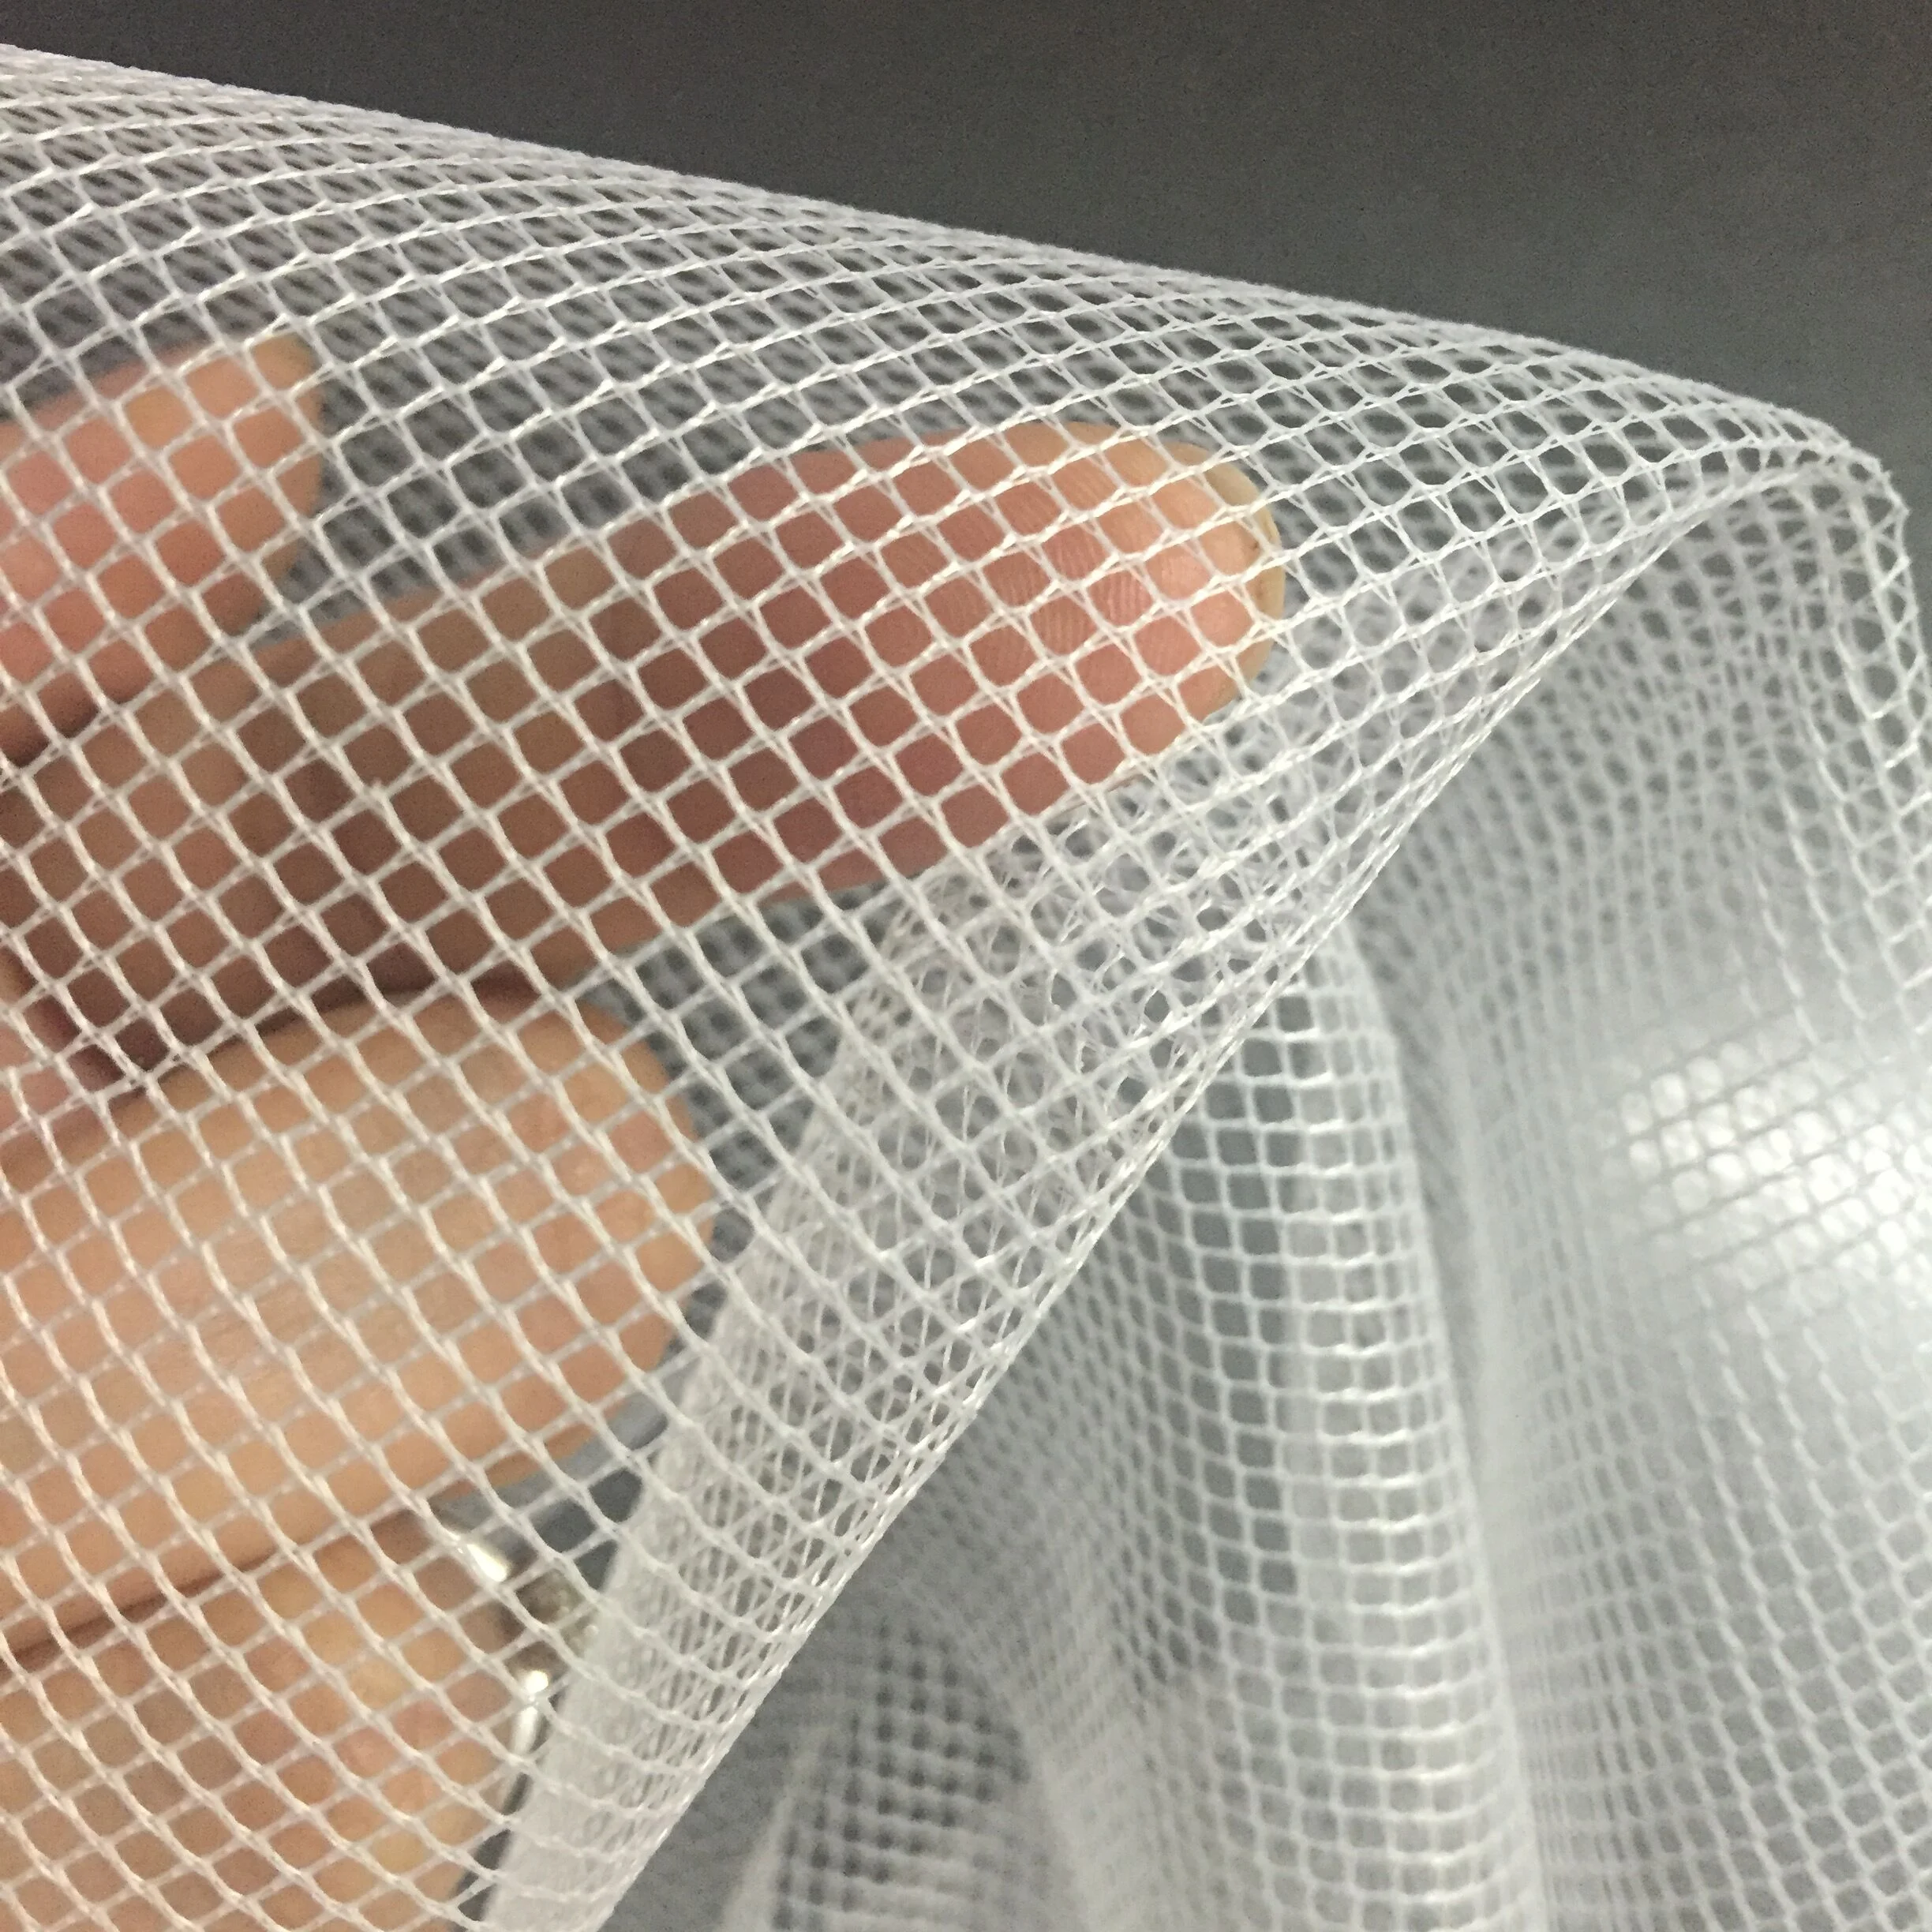 50 Mesh Insect Net / Black/ Grey 30M Roll Insect Flyscreen Flywire